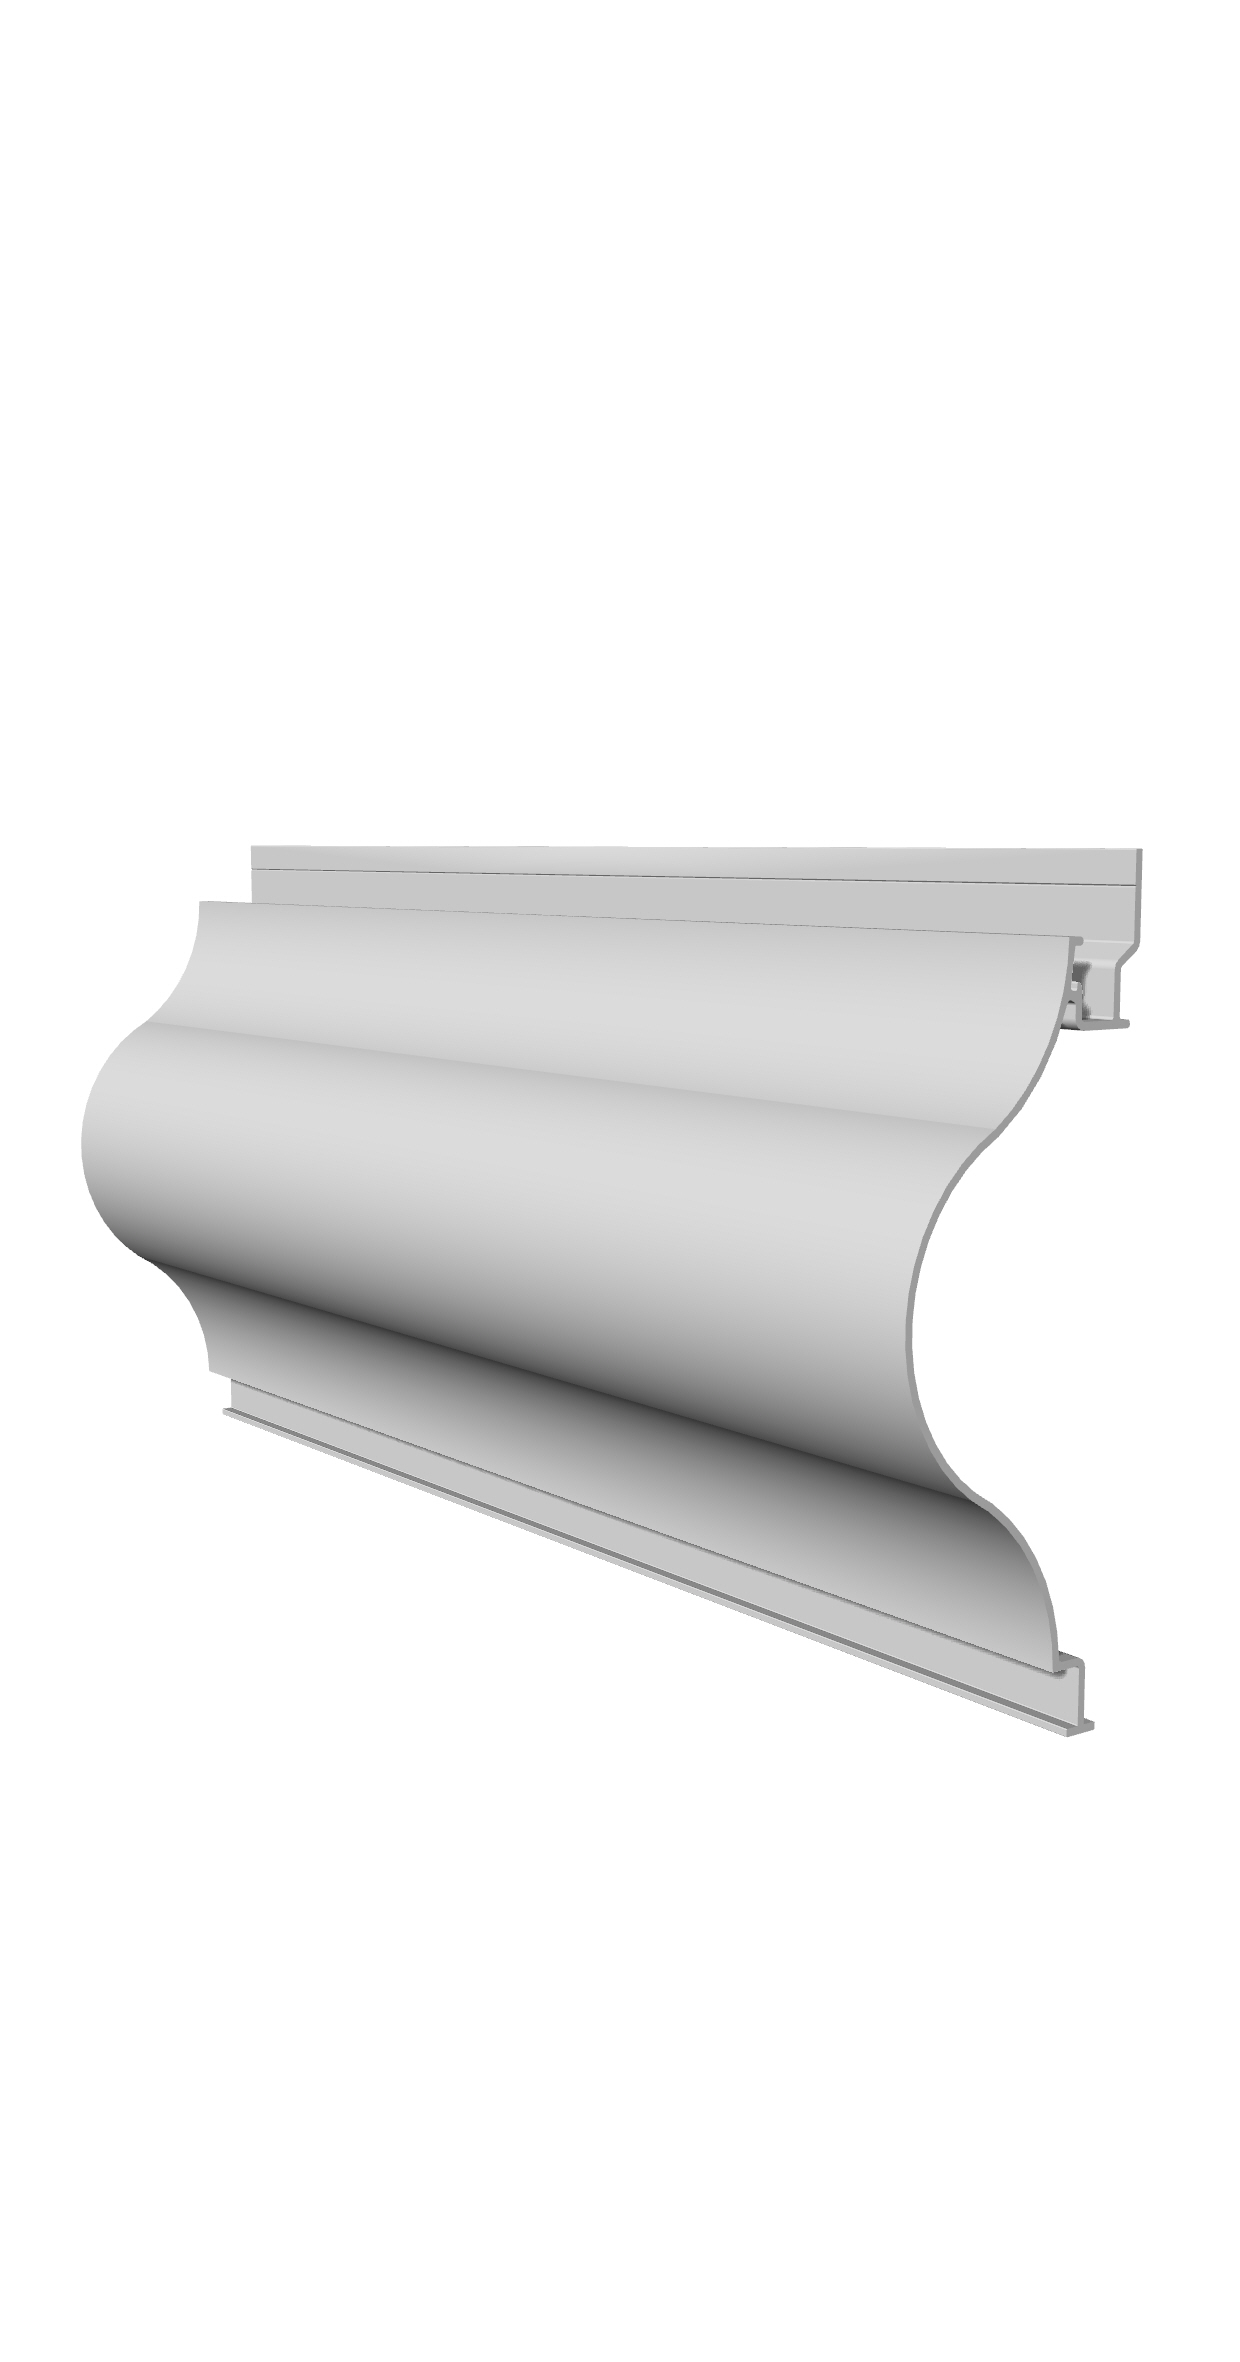 ECO Series | Recyclable aluminum profile system